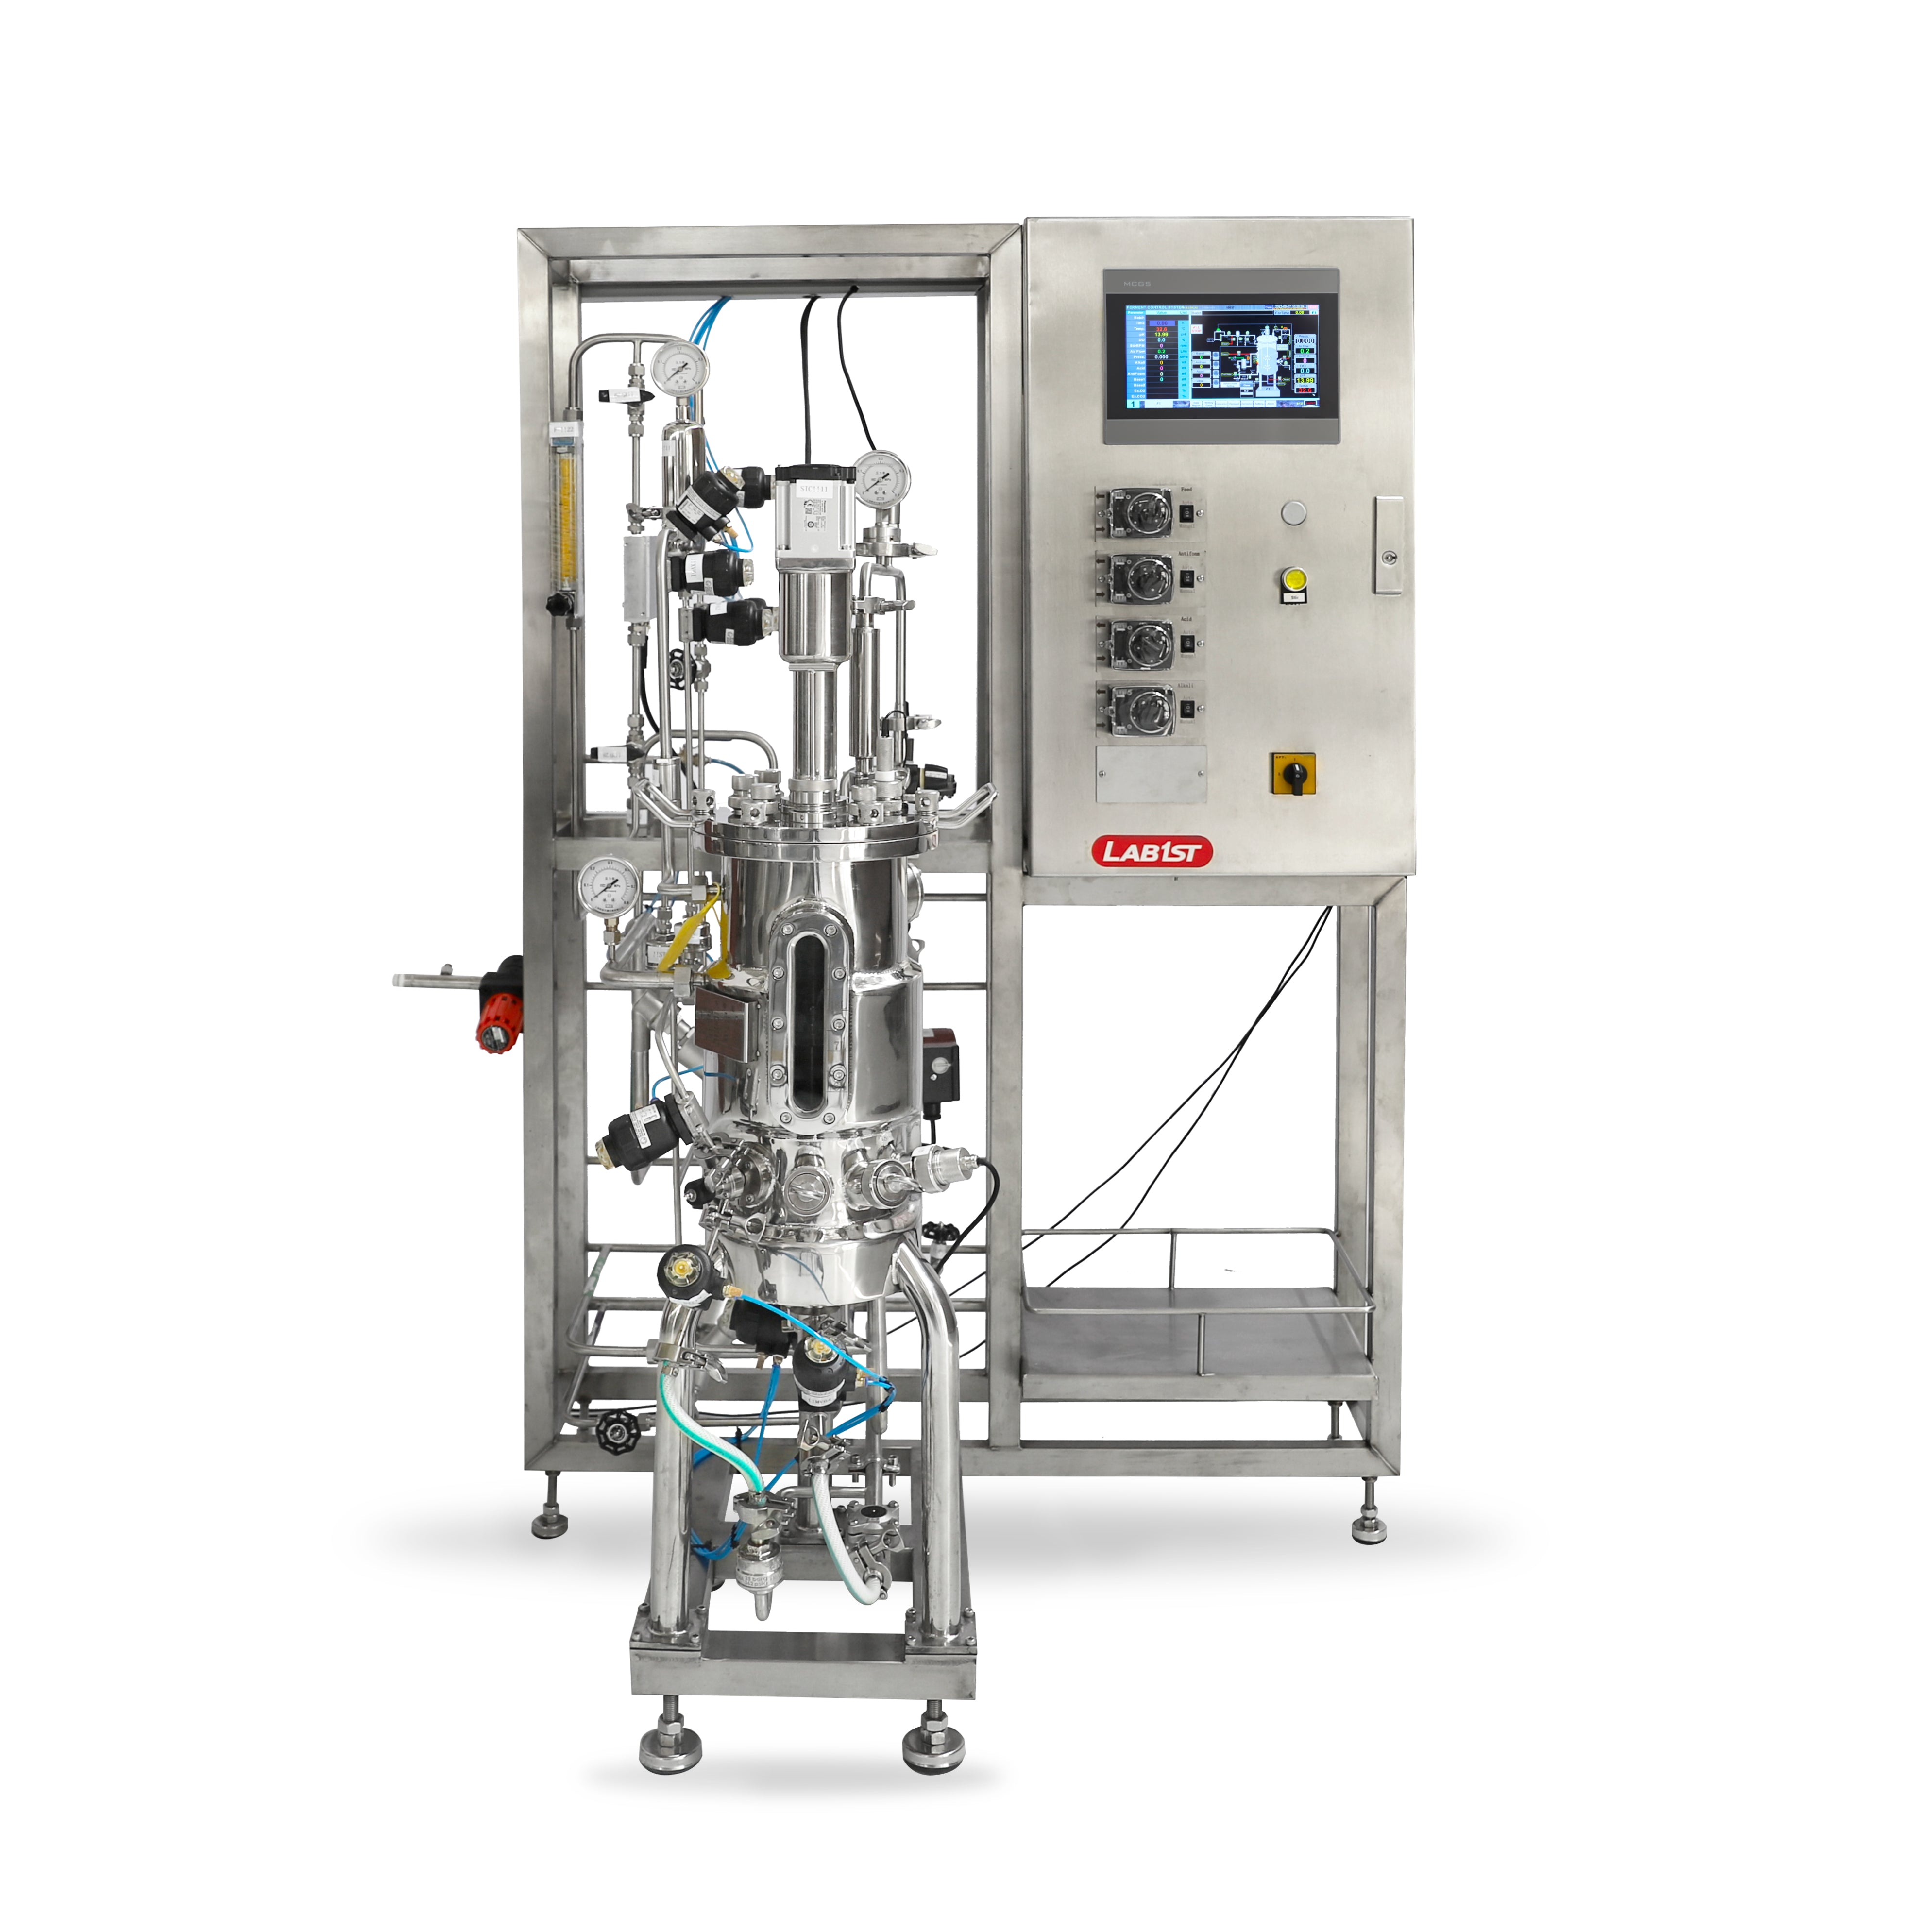 150L Stainless Steel Bioreactor for Microbial Fermentation with 2 Gas Inlets BR500-M1